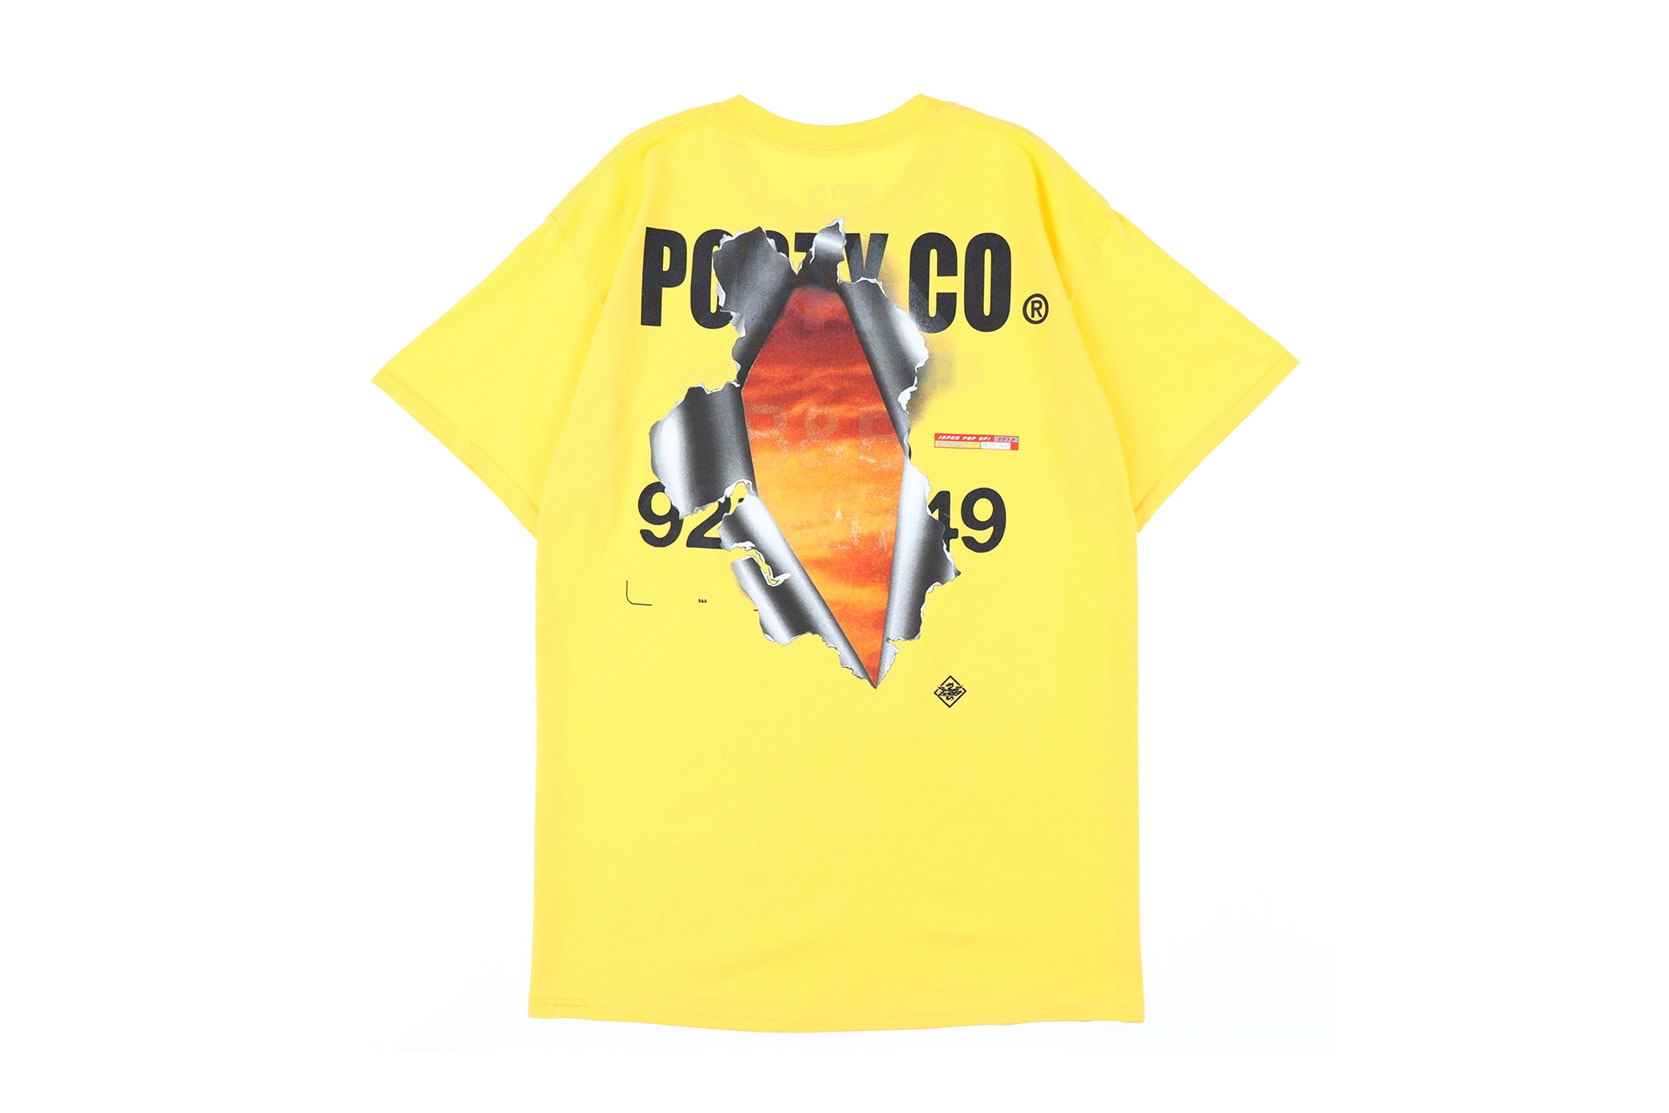 Post Malone Nubian Pop Up Store Shop Clothing Collection Buy Purchase Cop Long Sleeve Short Sleeve T-Shirts Beanies Tote Bags exclusive merch july 28 29 2018 limited edition exclusive tour